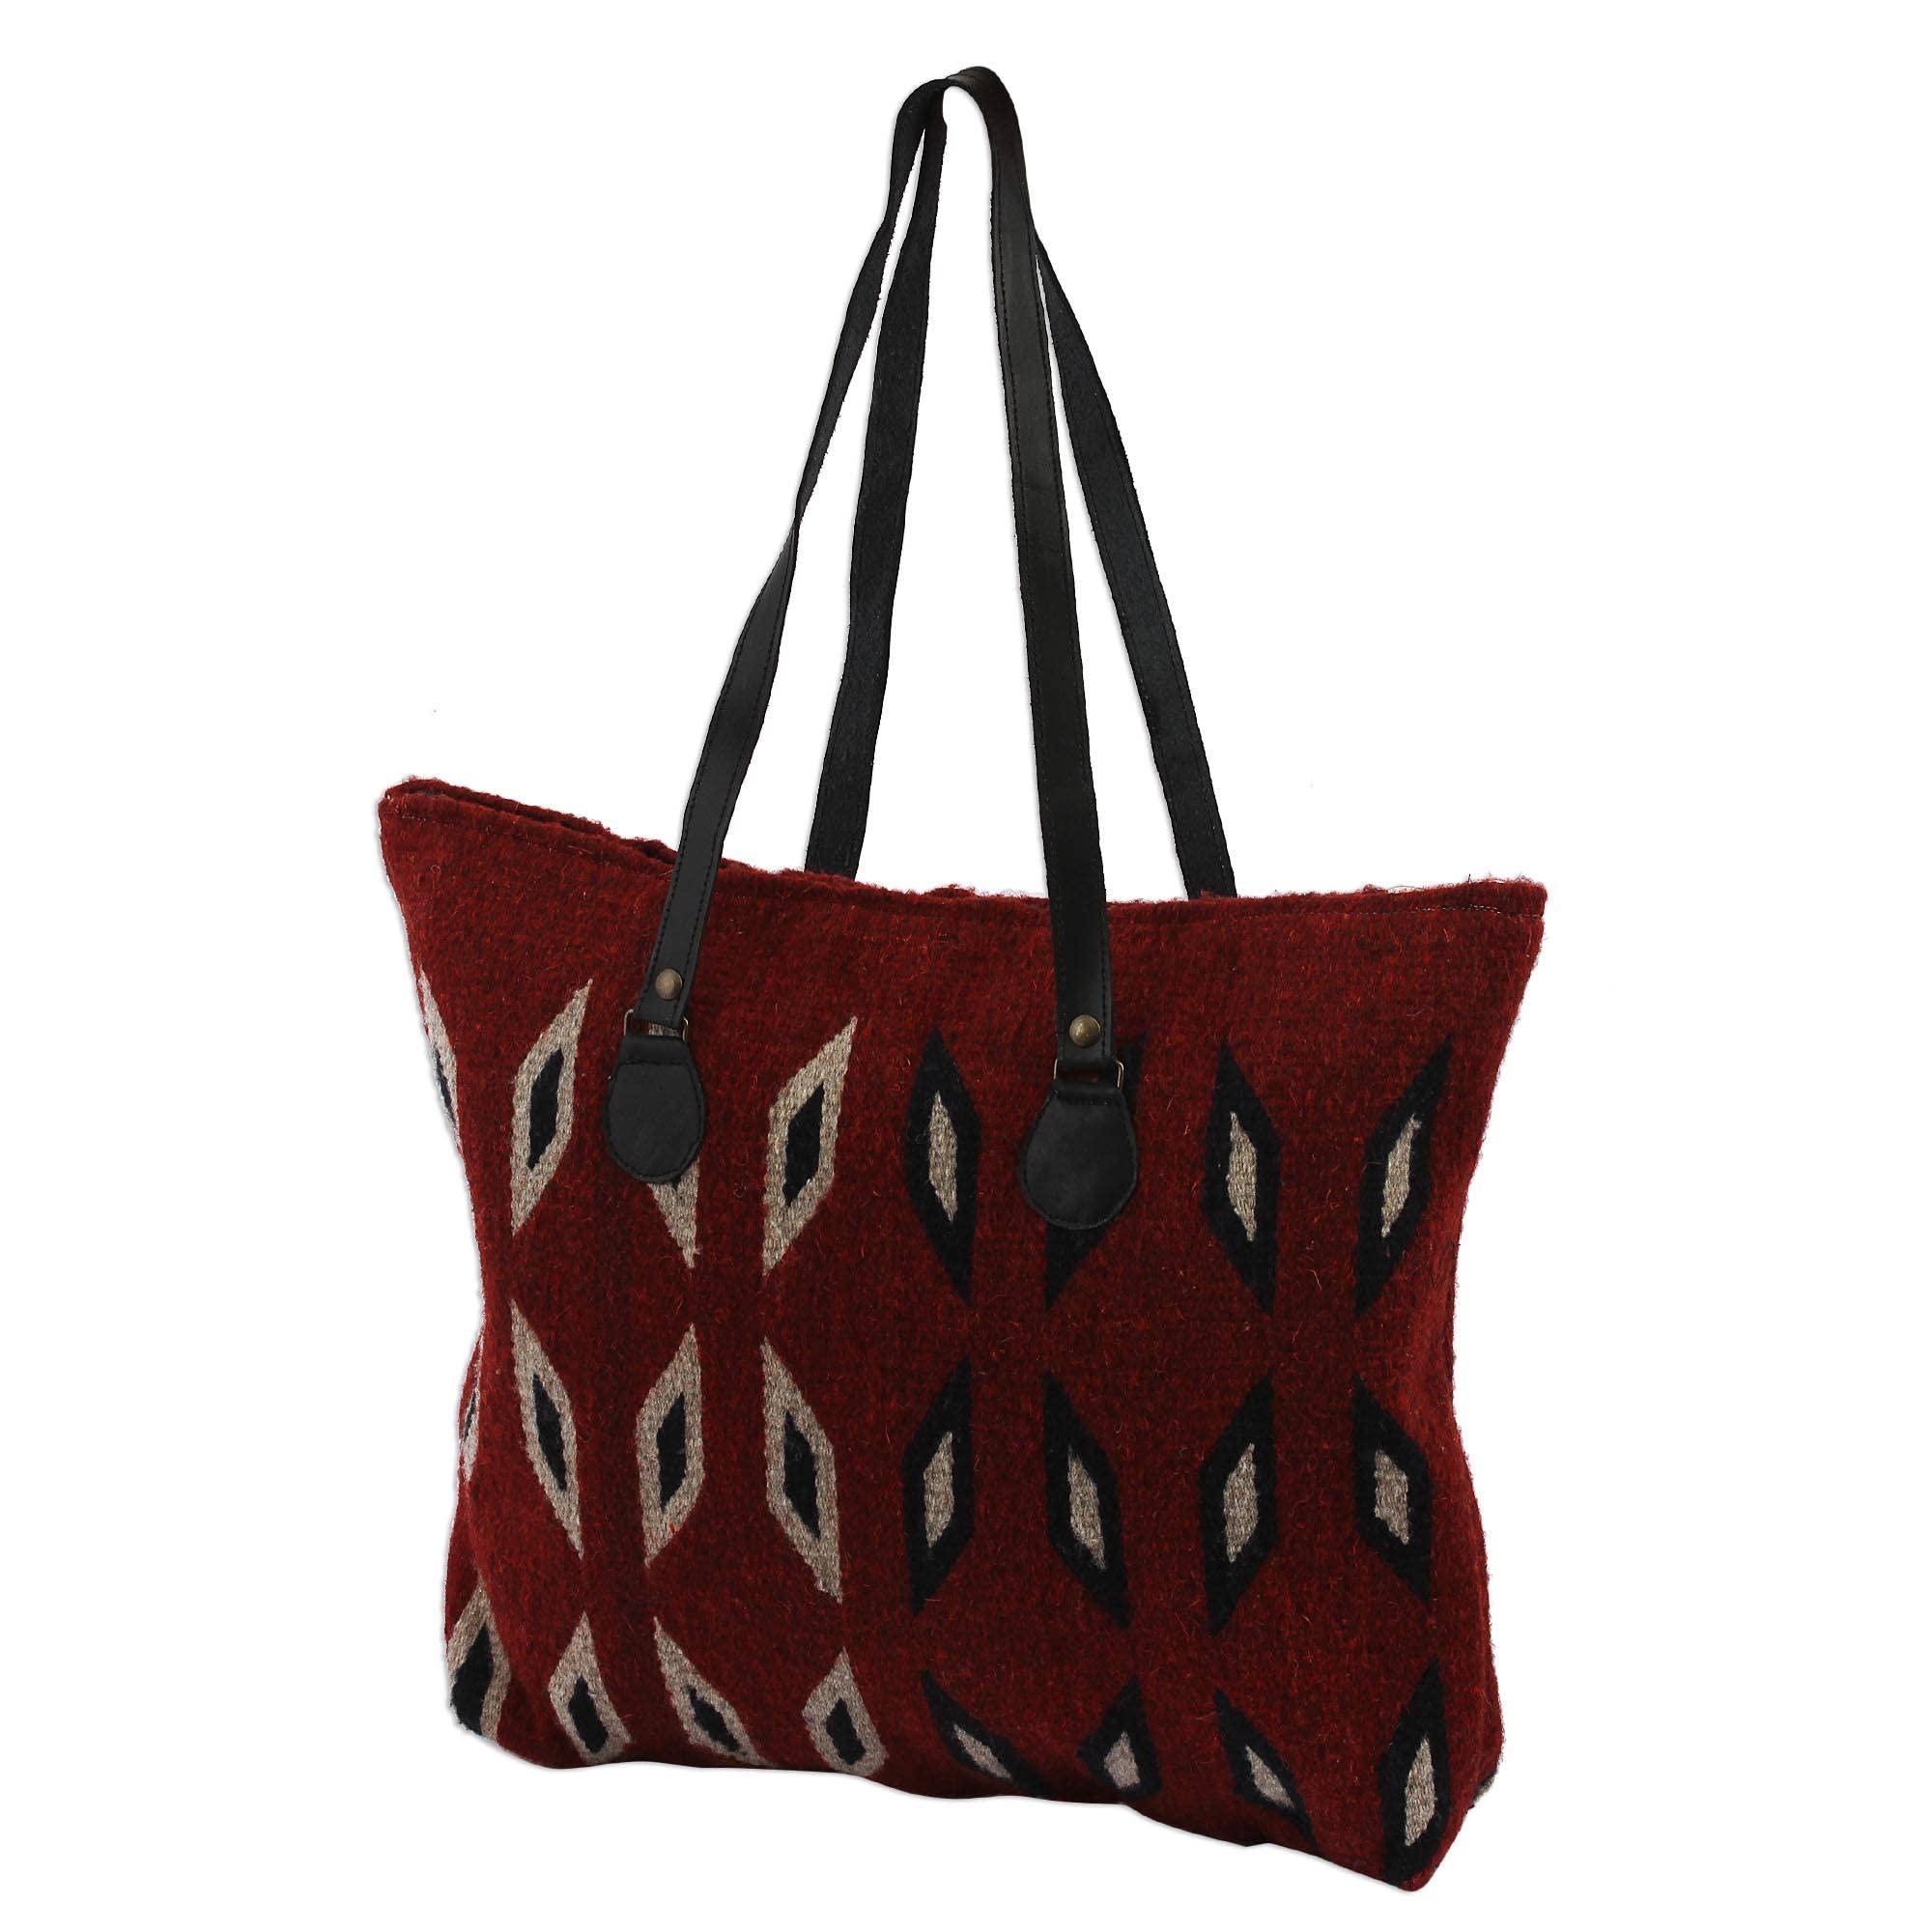 NOVICA Blue Leather Accent and Zapotec Wool Tote Bag, Heartland'